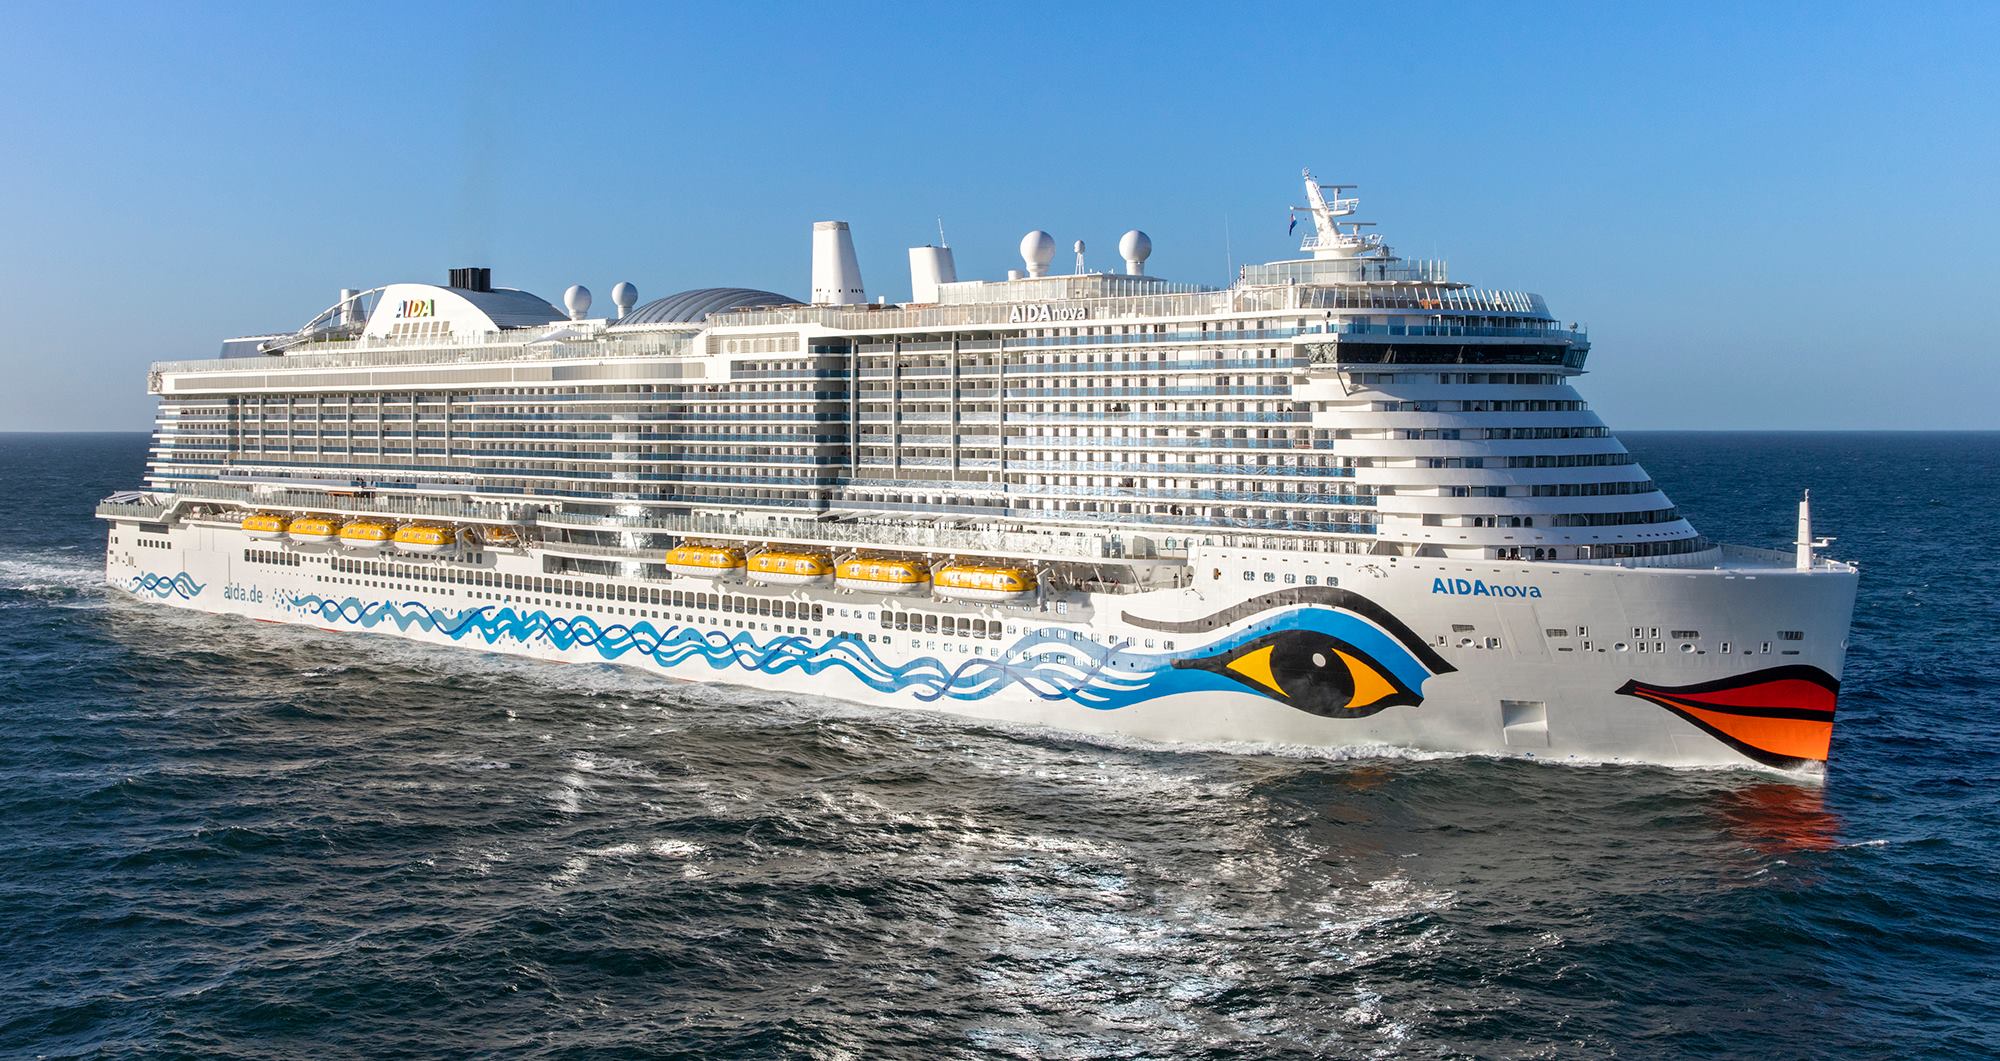 TMC wins contract for AIDA Cruises' third LNG-powered newbuild